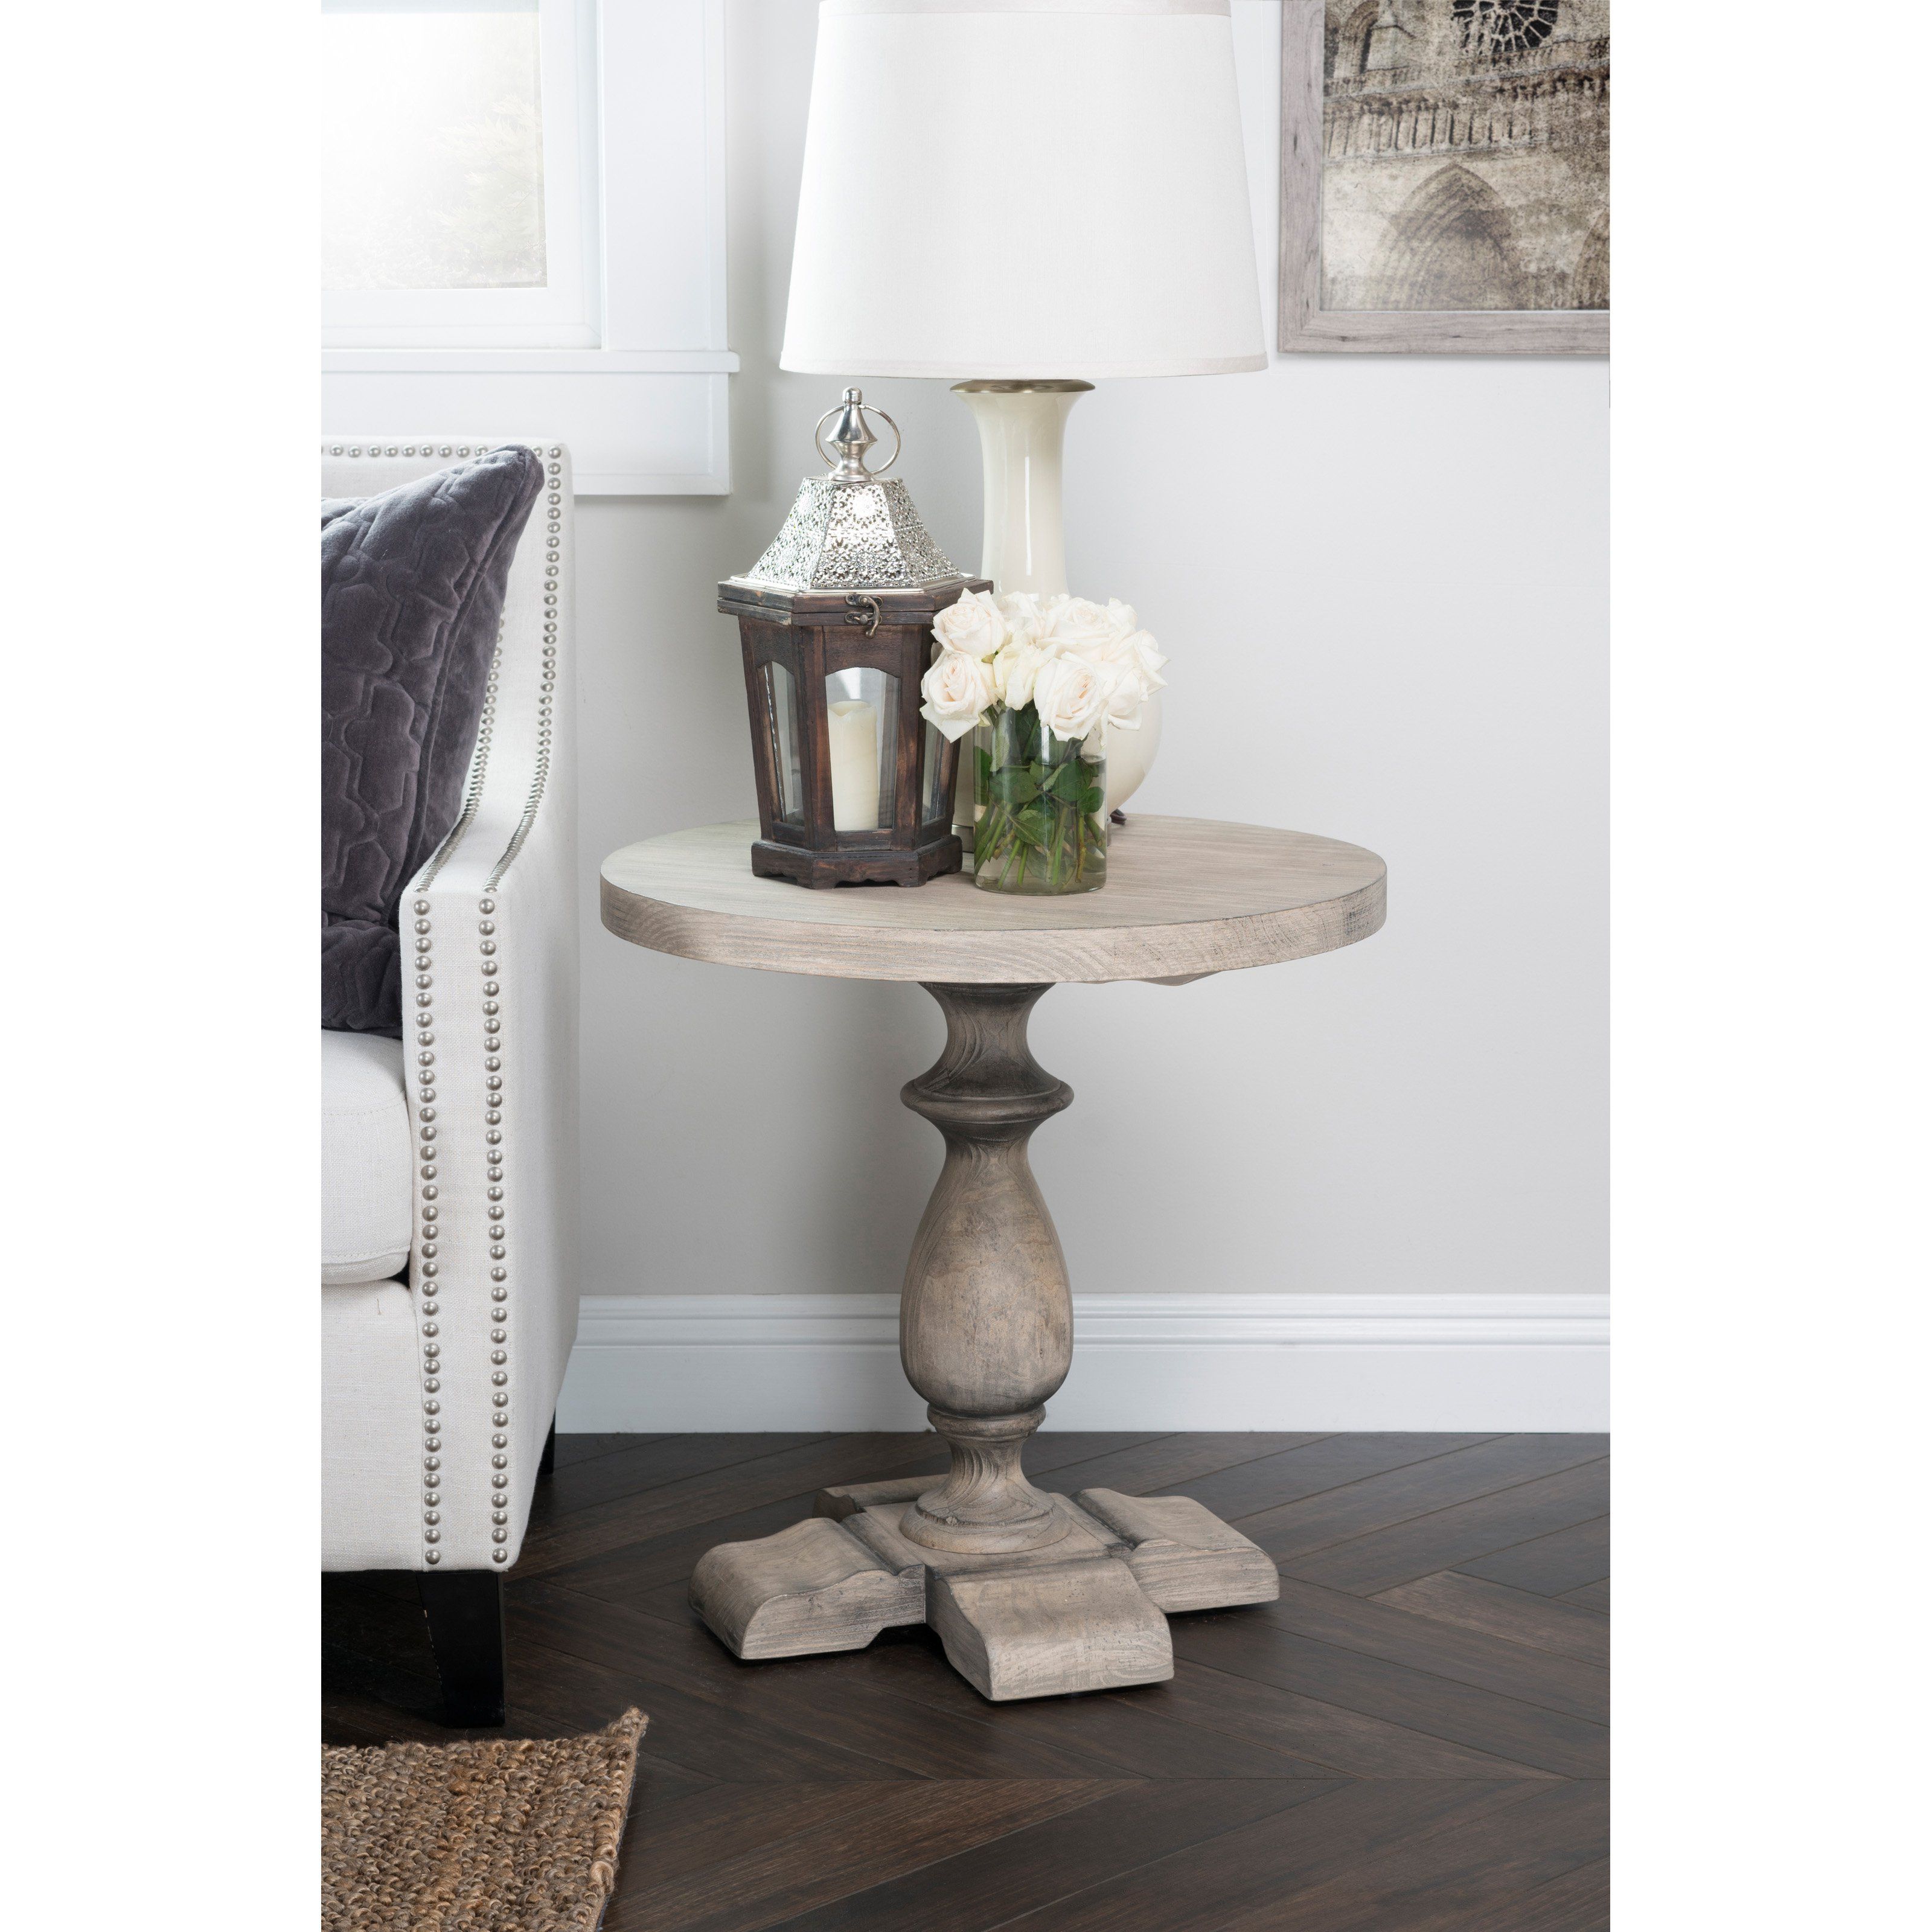 kosas home rustic westminster warm grey round end table gray accent acrylic console ikea farmhouse coffee with storage baskets sheesham wood west elm rocking chair lucite nesting